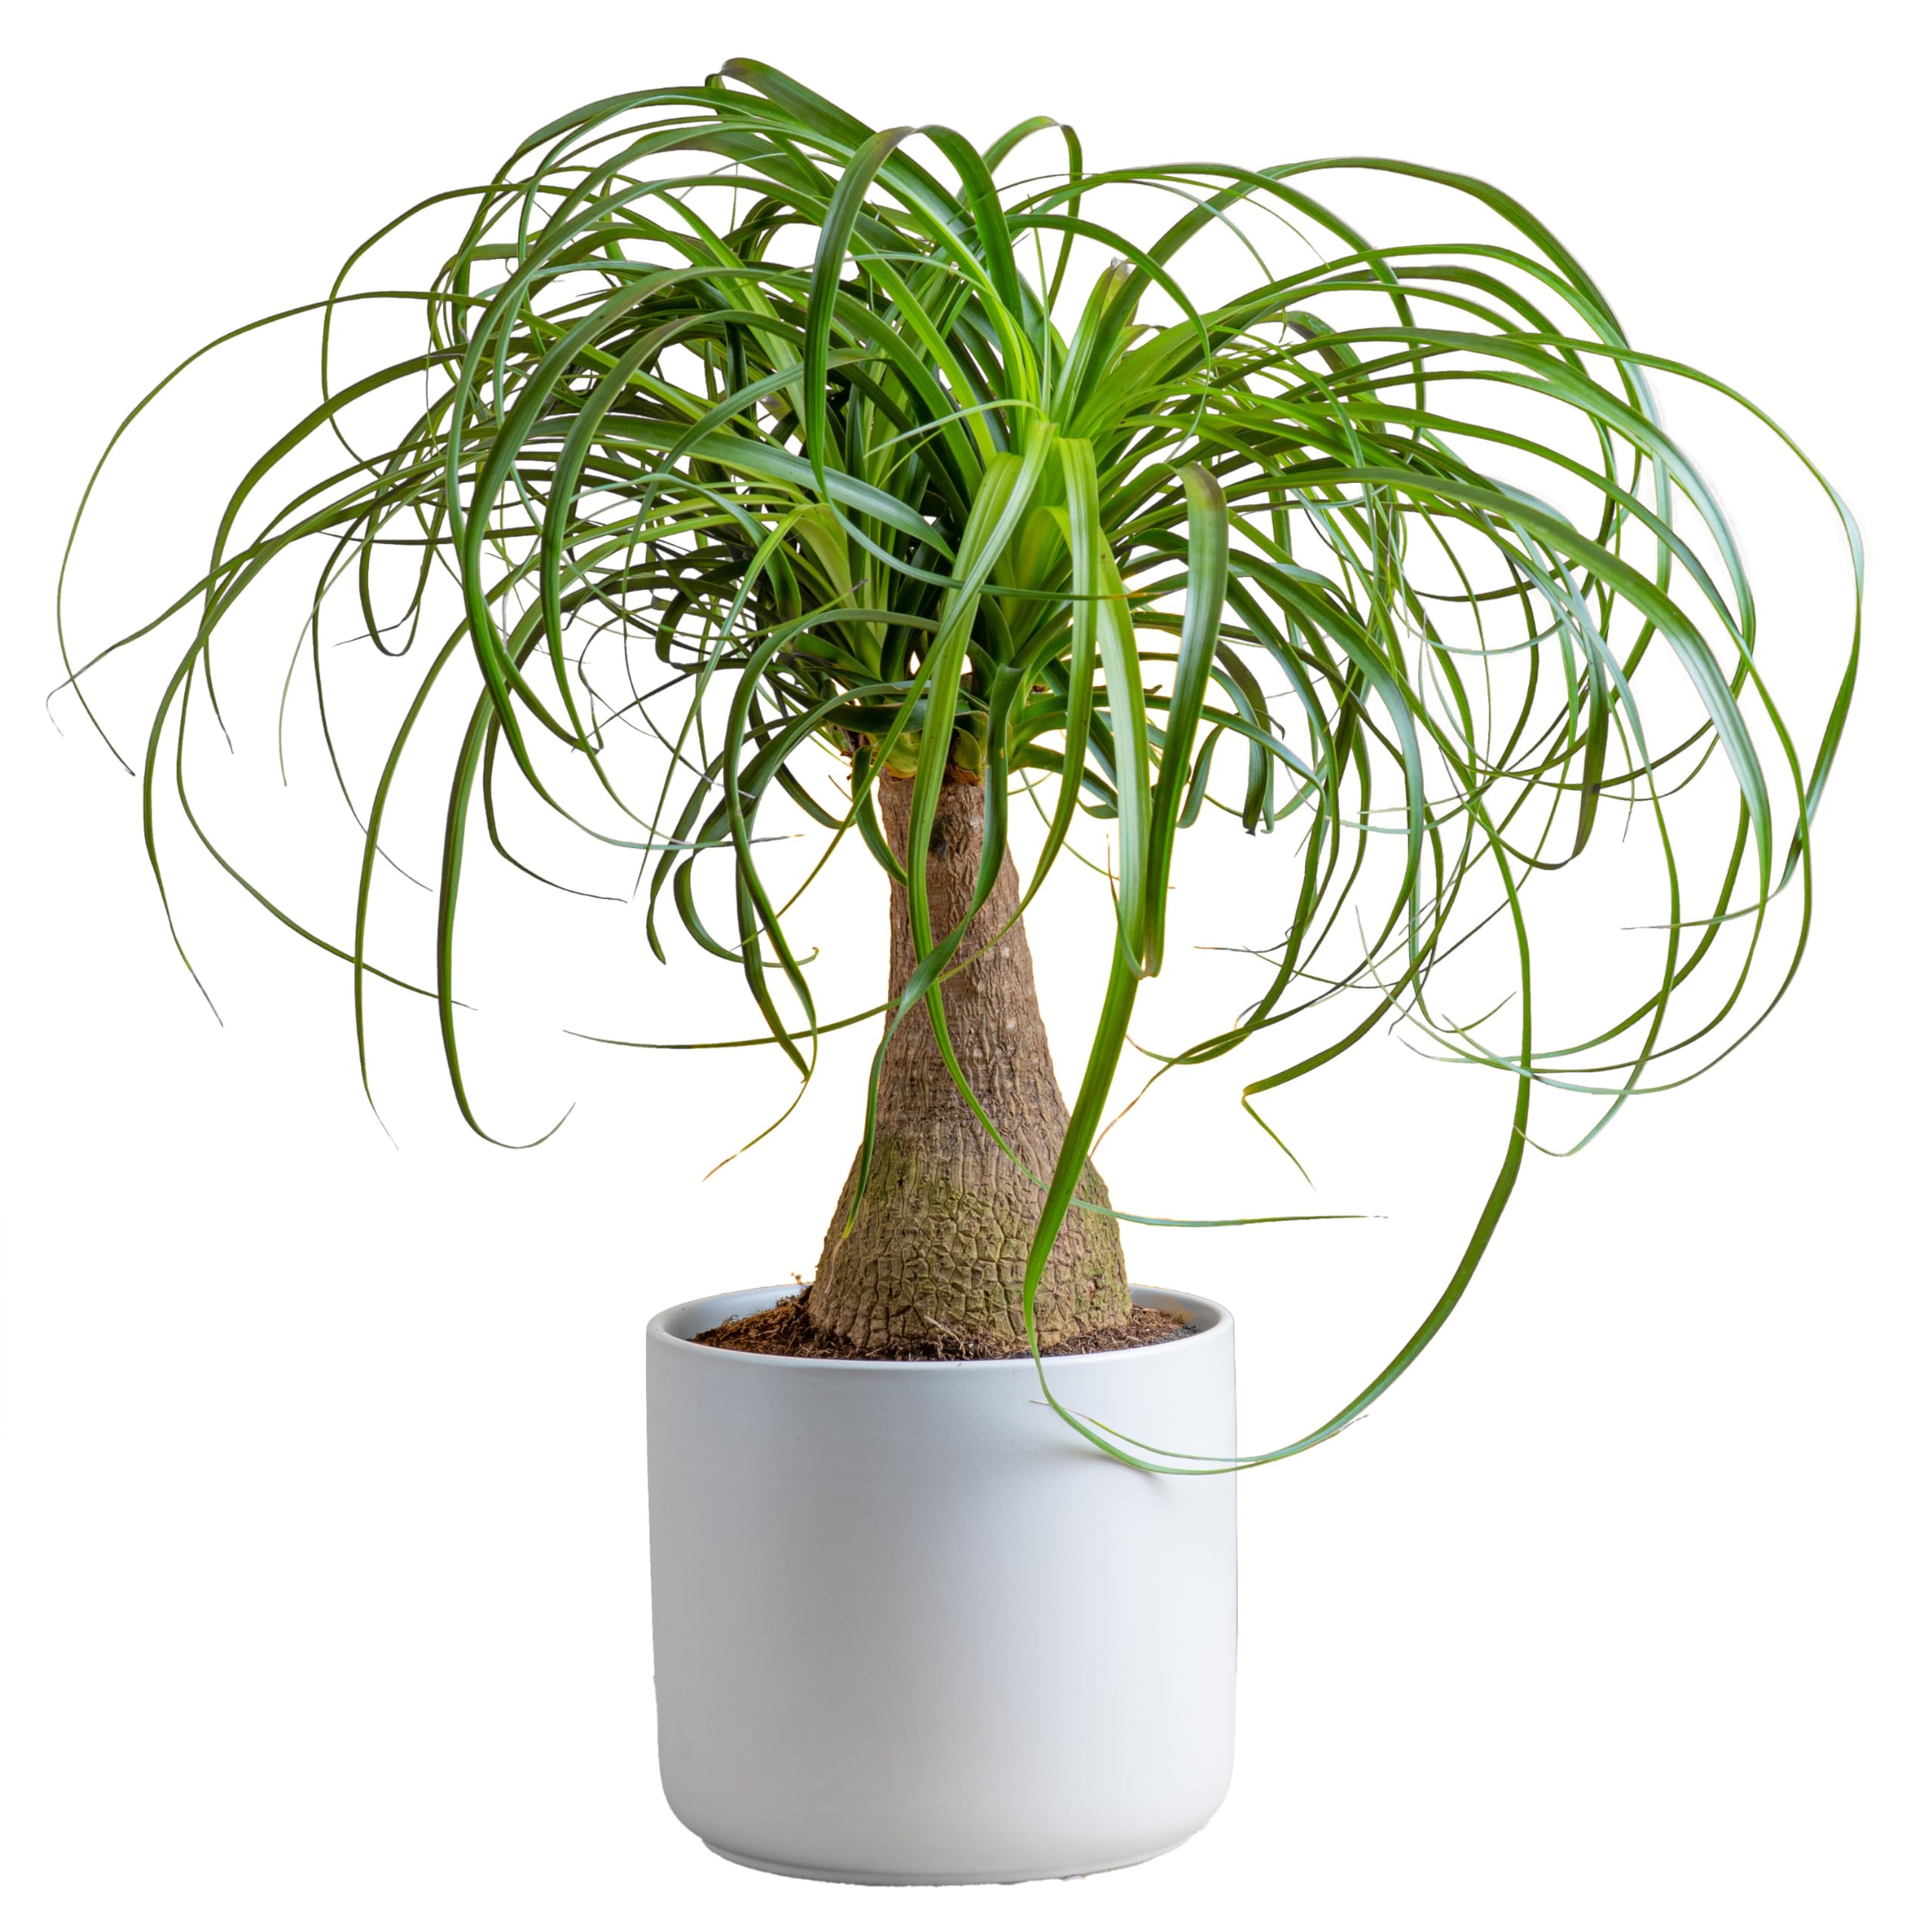 Costa Farms Ponytail Palm Bonsai, Easy to Grow Live Indoor Plant in Indoor Garden Planter Pot, Air Purifying Houseplant, New House, Birthday Gift, Office, Home, and Room Décor, 15-20 Inches Tall